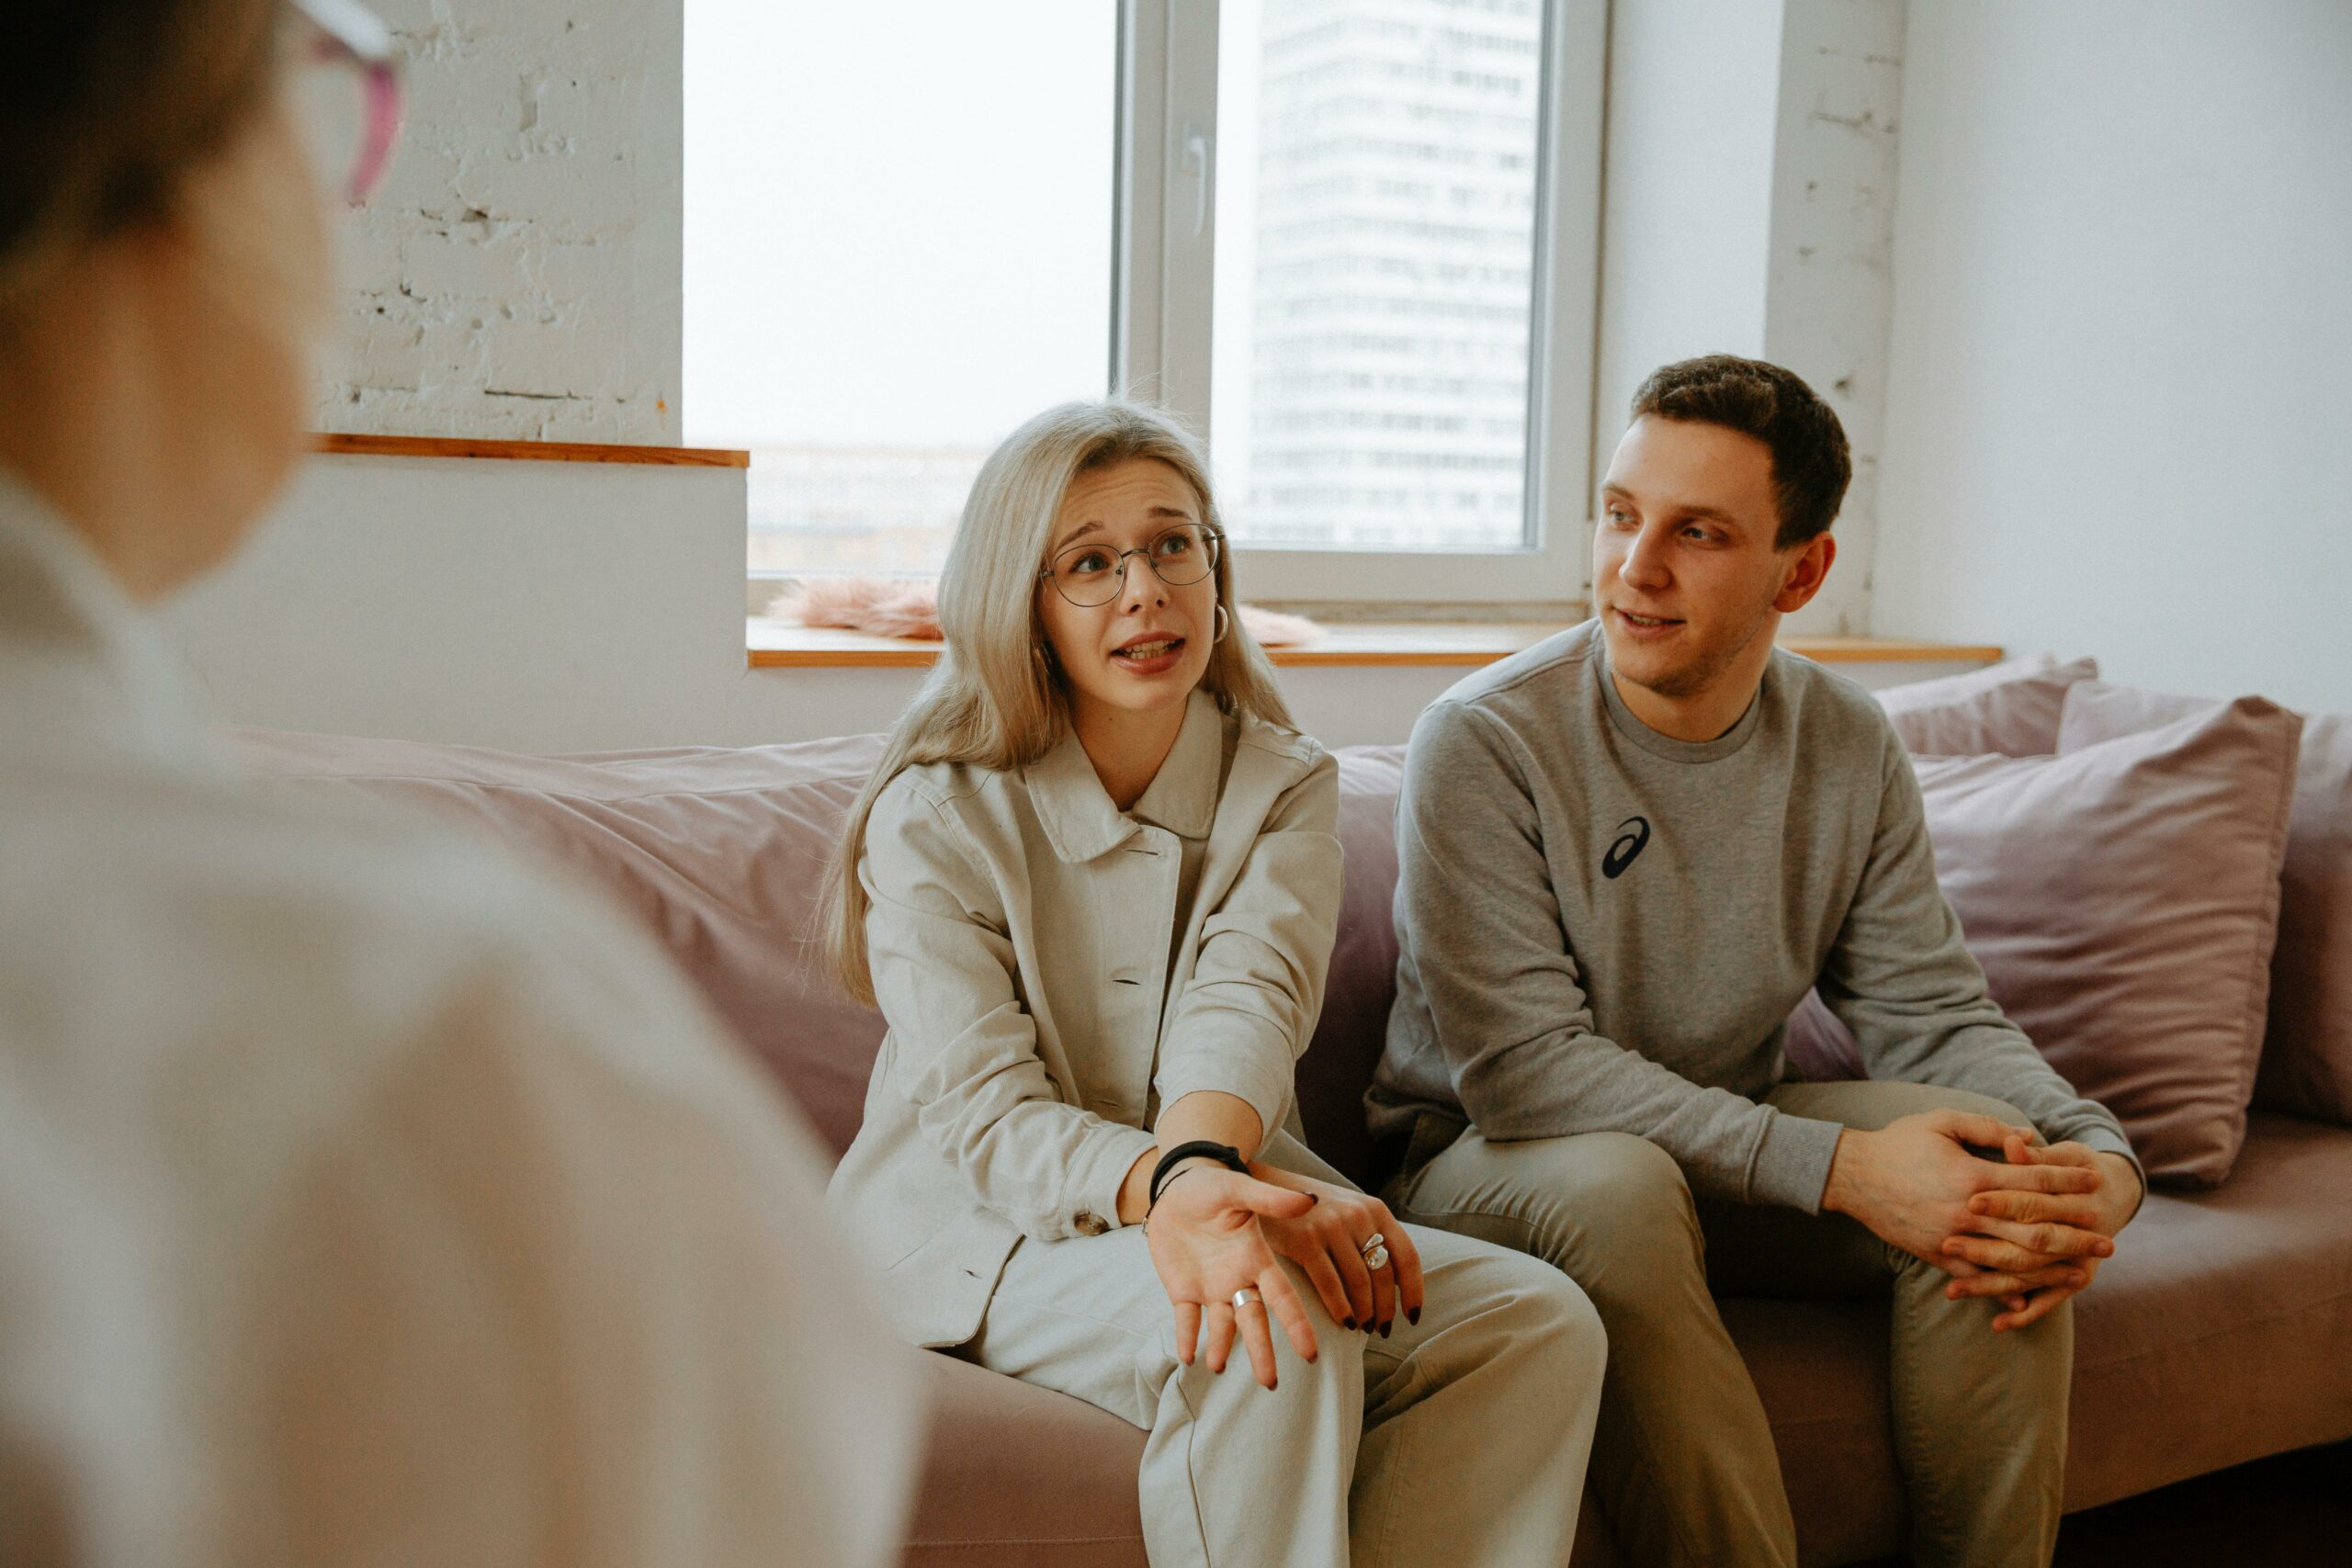 Top 6 Questions Fielded in Couples Therapy – By a Couples Therapist